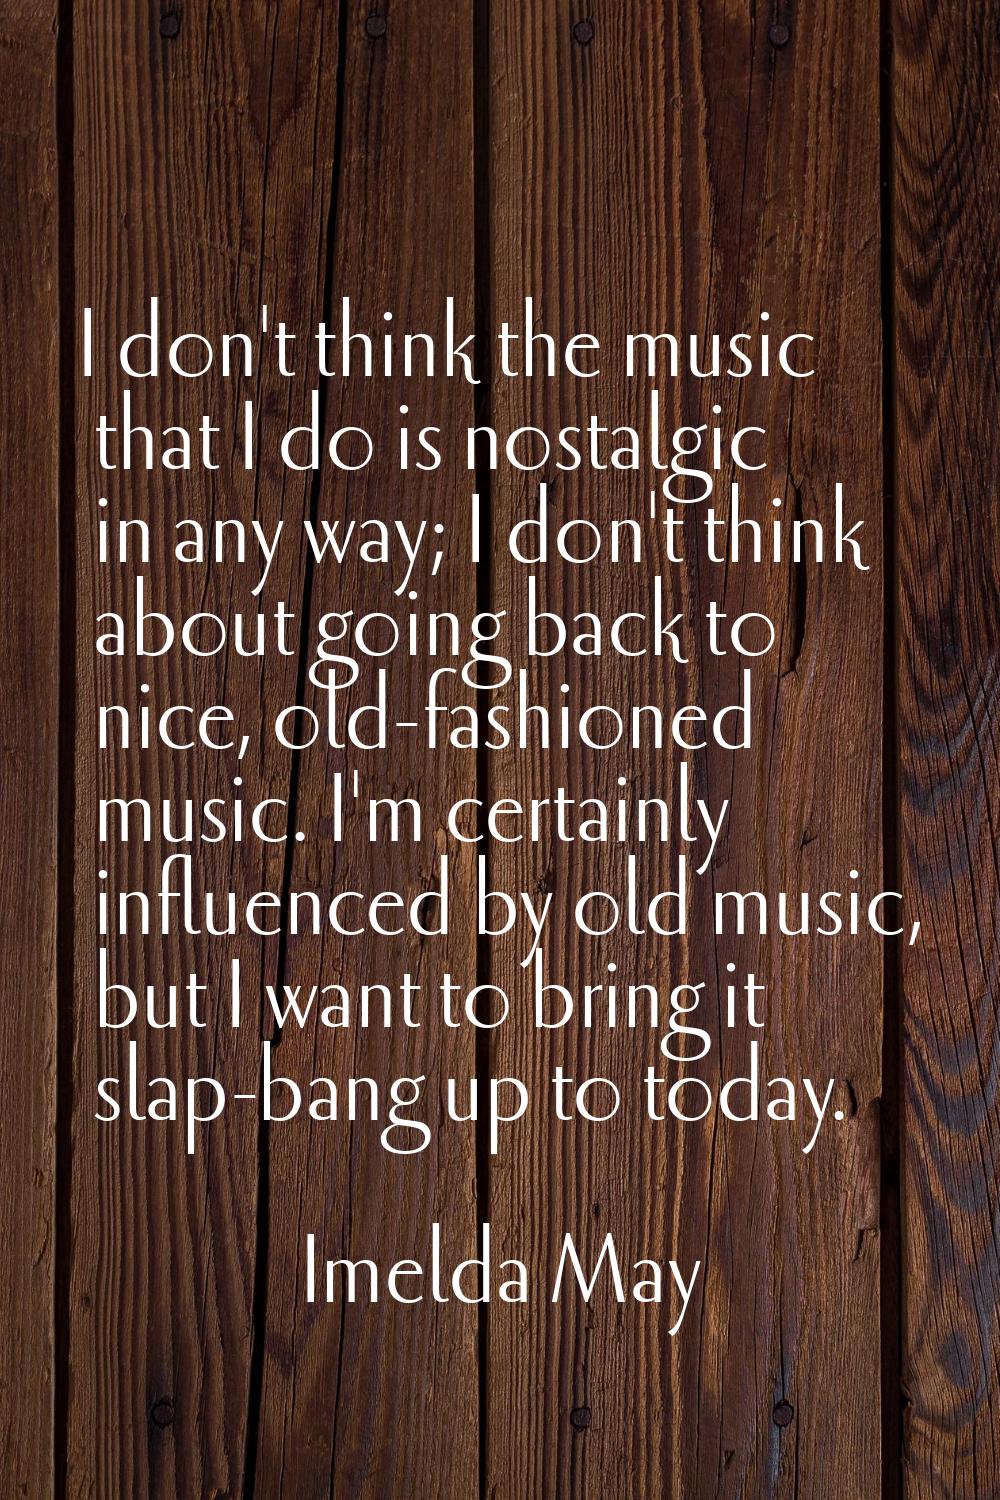 I don't think the music that I do is nostalgic in any way; I don't think about going back to nice, 